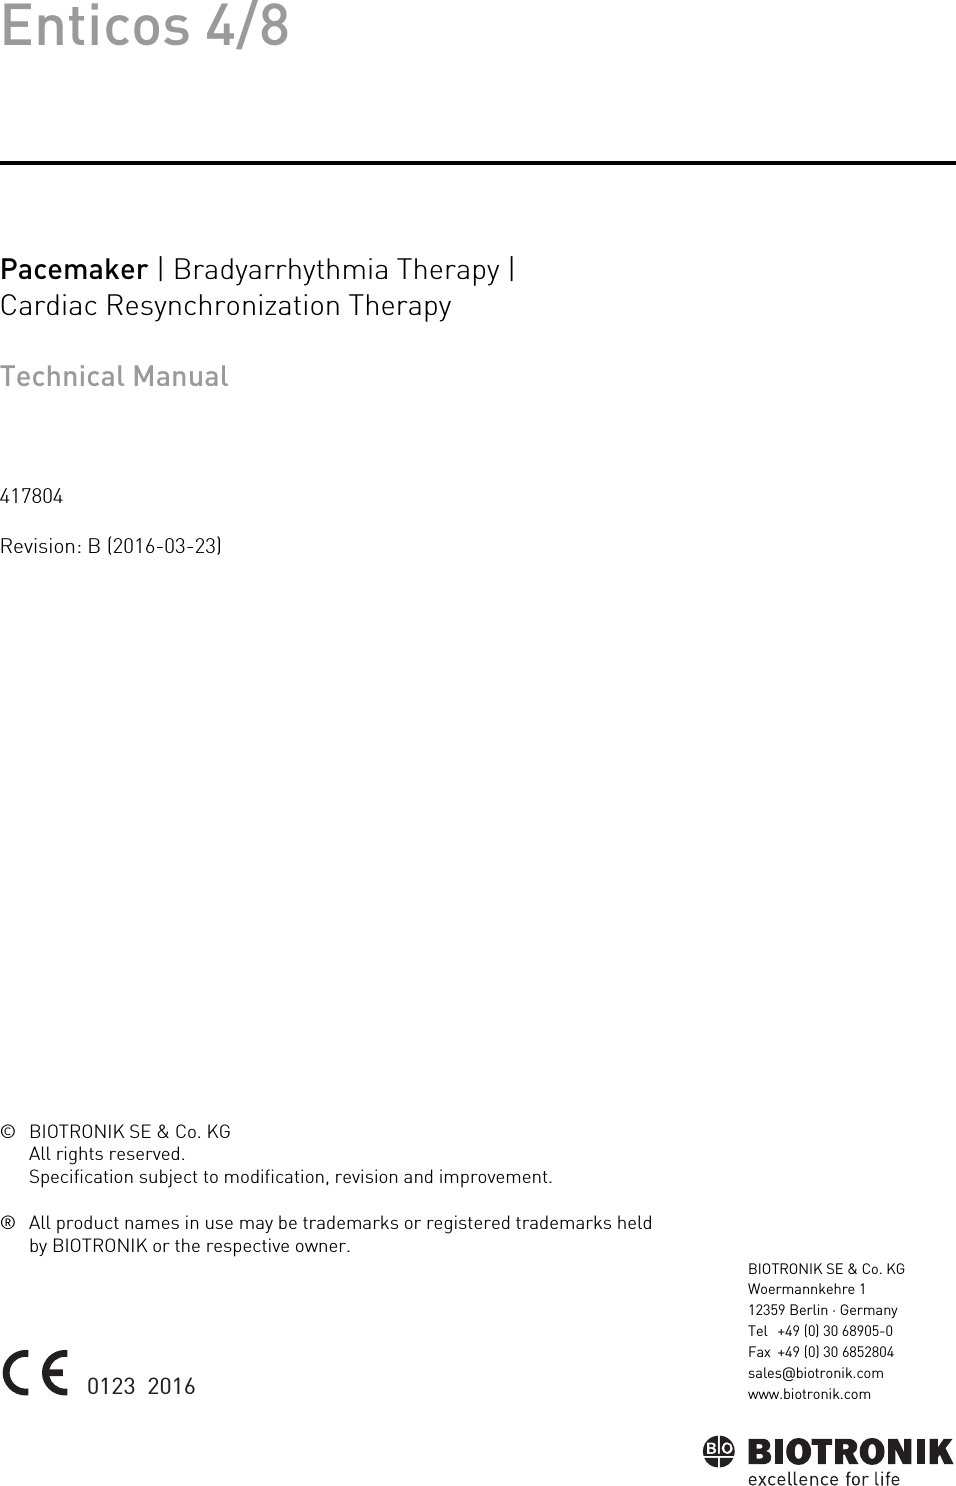 Enticos 4/8Pacemaker | Bradyarrhythmia Therapy | Cardiac Resynchronization TherapyTechnical Manual417804Revision: B (2016-03-23)© BIOTRONIK SE &amp; Co. KGAll rights reserved.Specification subject to modification, revision and improvement.® All product names in use may be trademarks or registered trademarks held by BIOTRONIK or the respective owner.Index  417804Technical ManualEnticos 4/80123  2016BIOTRONIK SE &amp; Co. KGWoermannkehre 112359 Berlin · GermanyTel +49 (0) 30 68905-0Fax +49 (0) 30 6852804sales@biotronik.comwww.biotronik.com